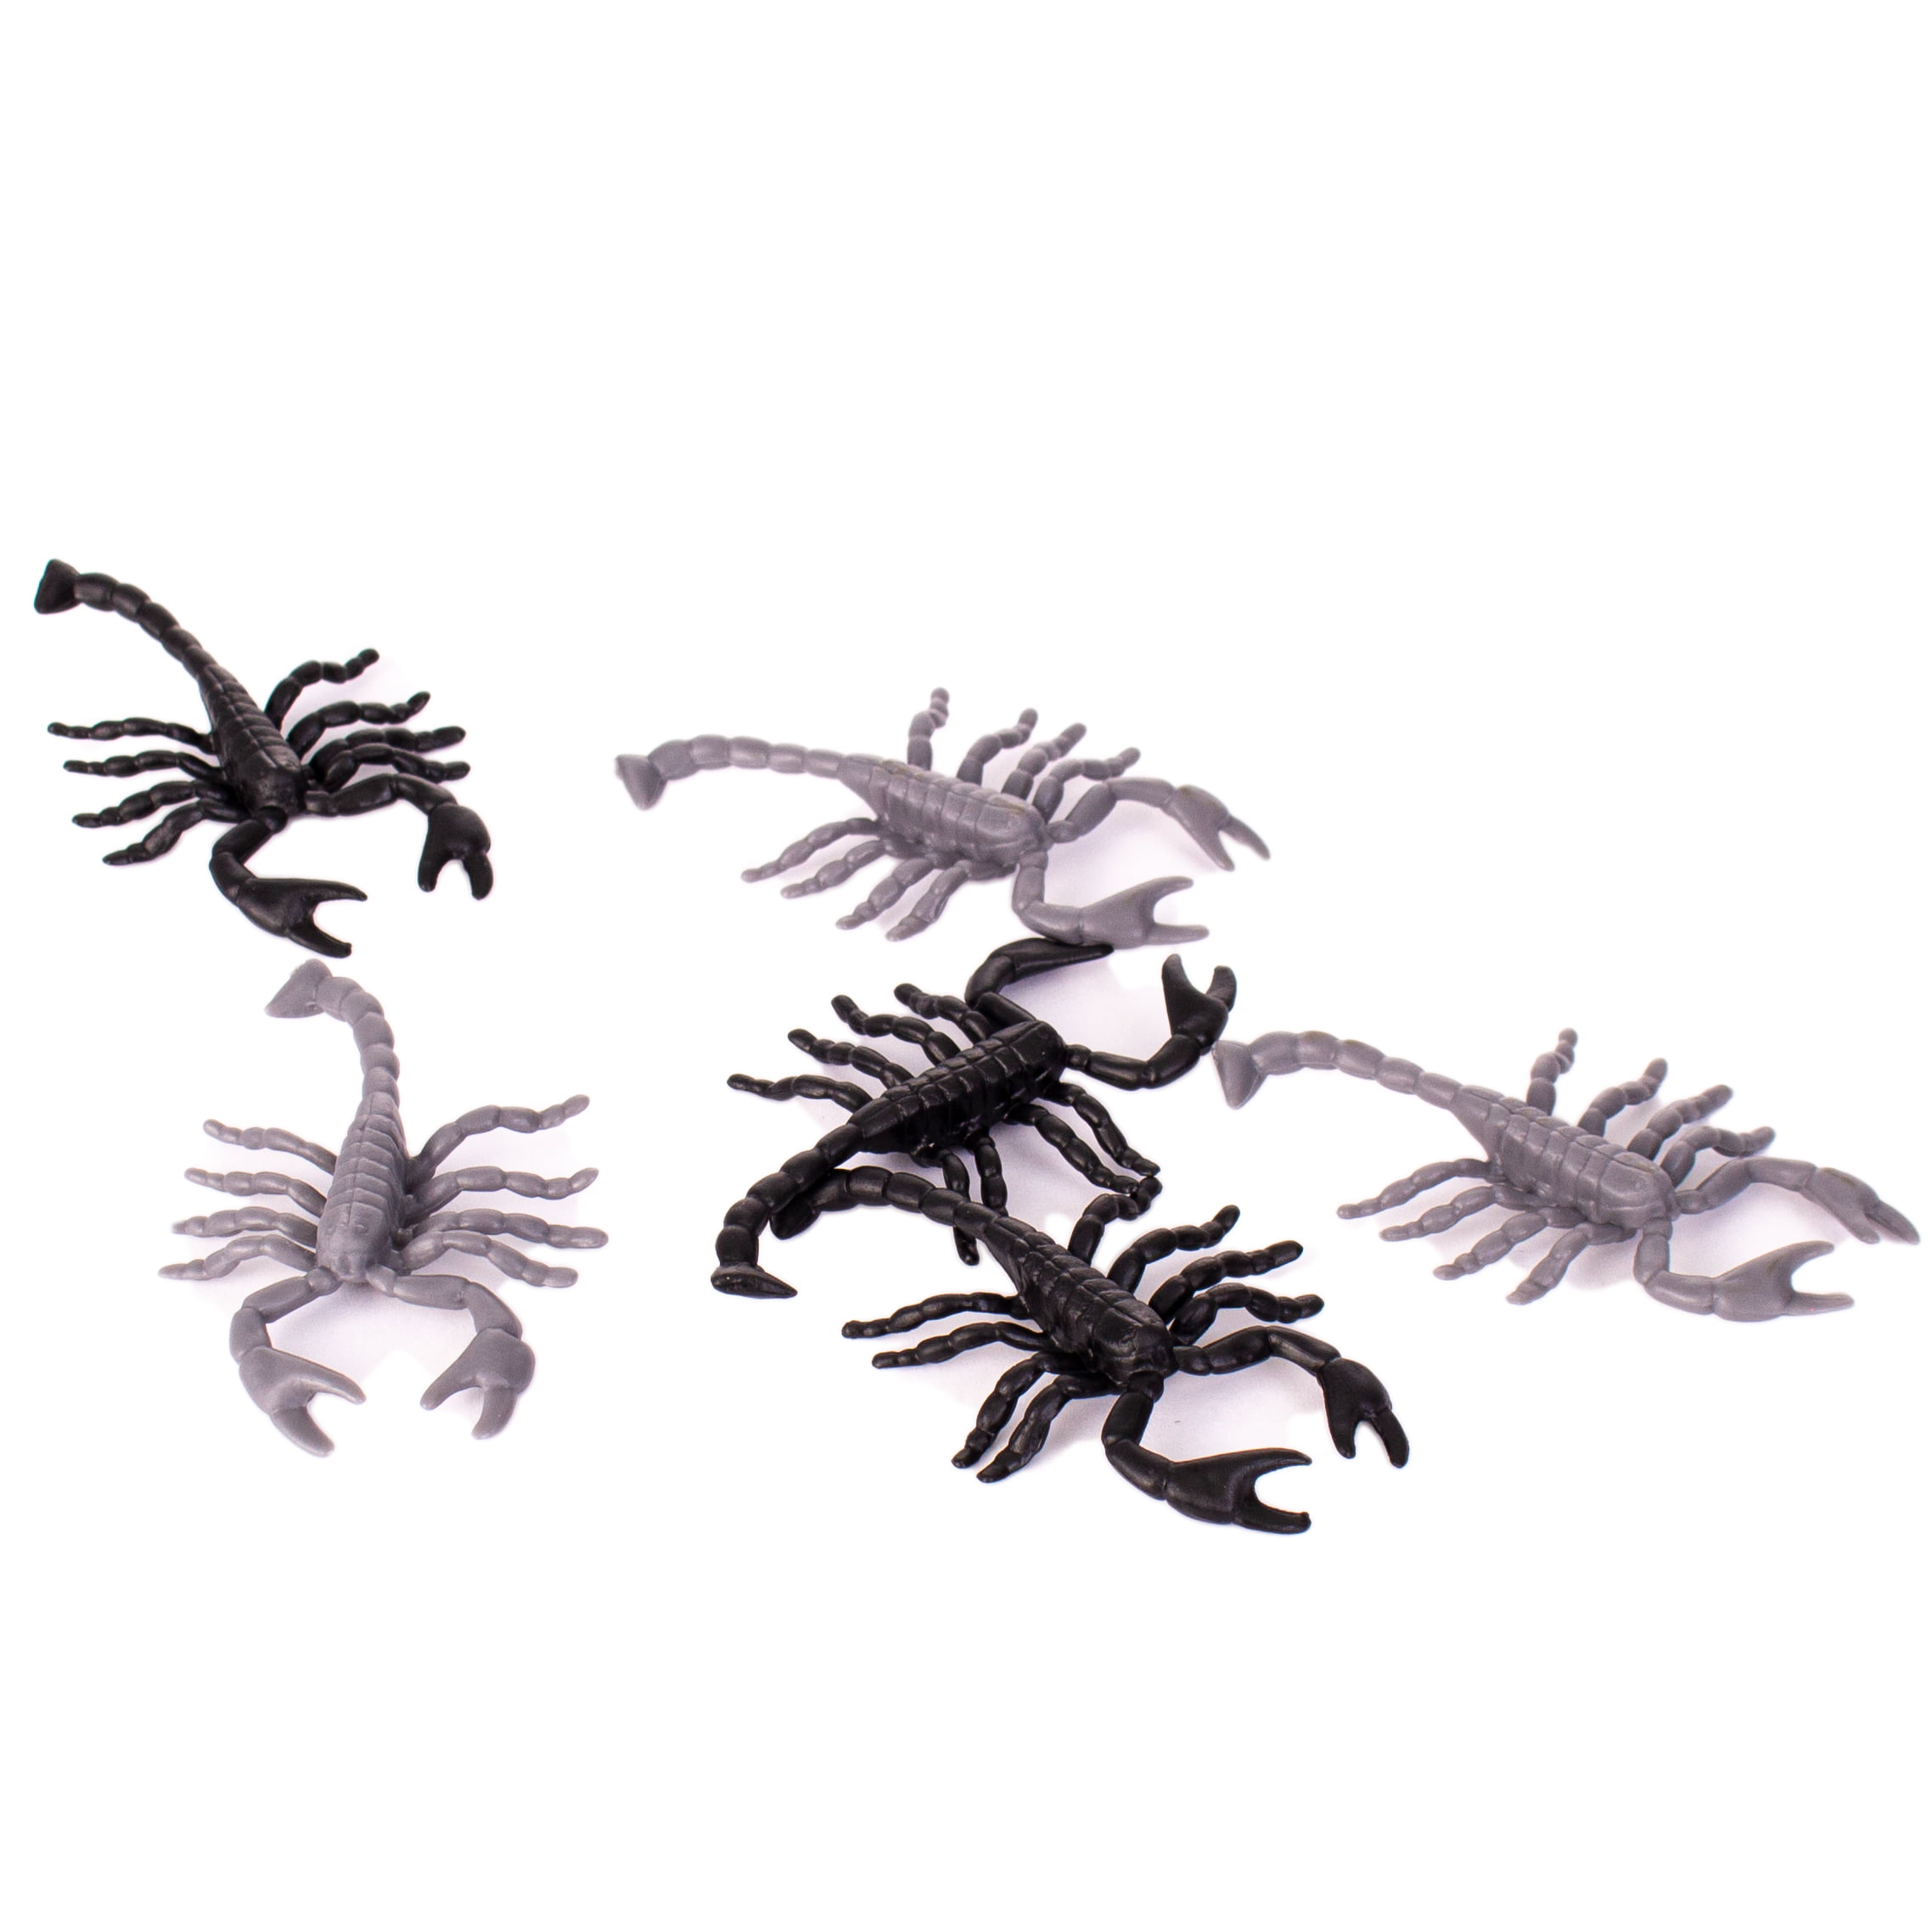 Insects Creepy Crawling Scorpions 2.75